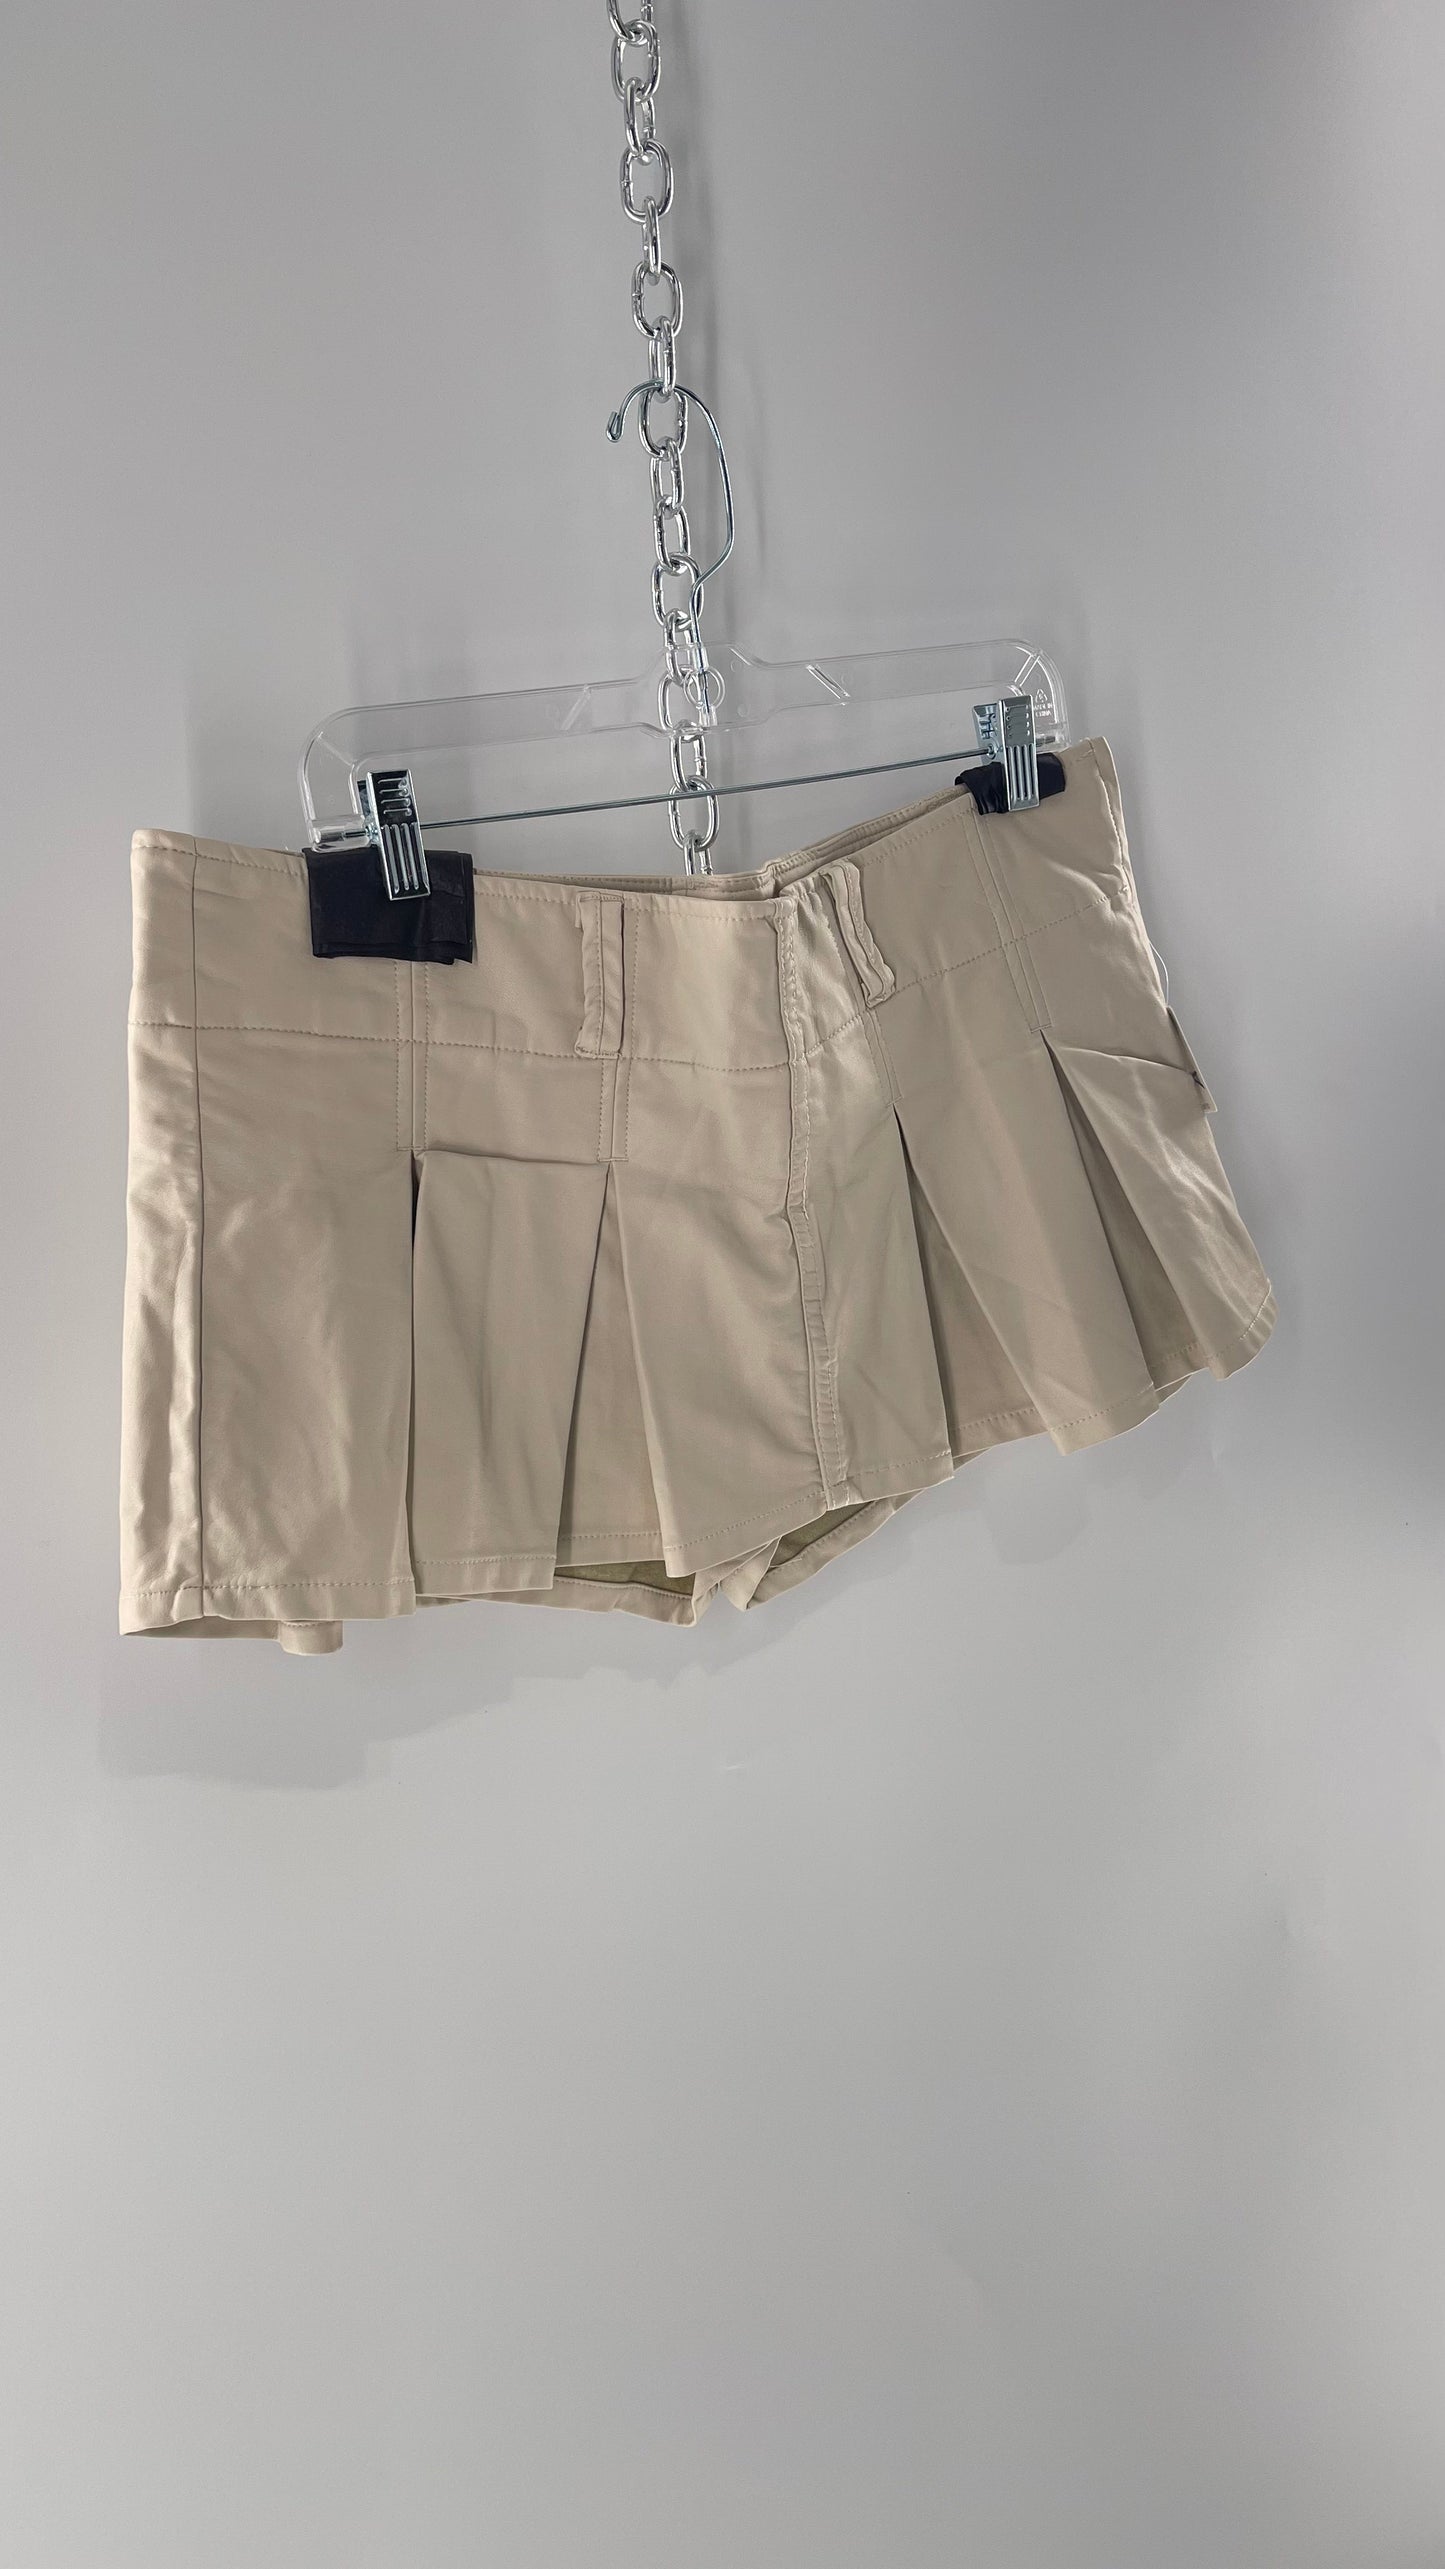 Free People Off White Pleated Vegan Leather Ultra Micro Mini Skirt with Hidden Built in Shorts (12)